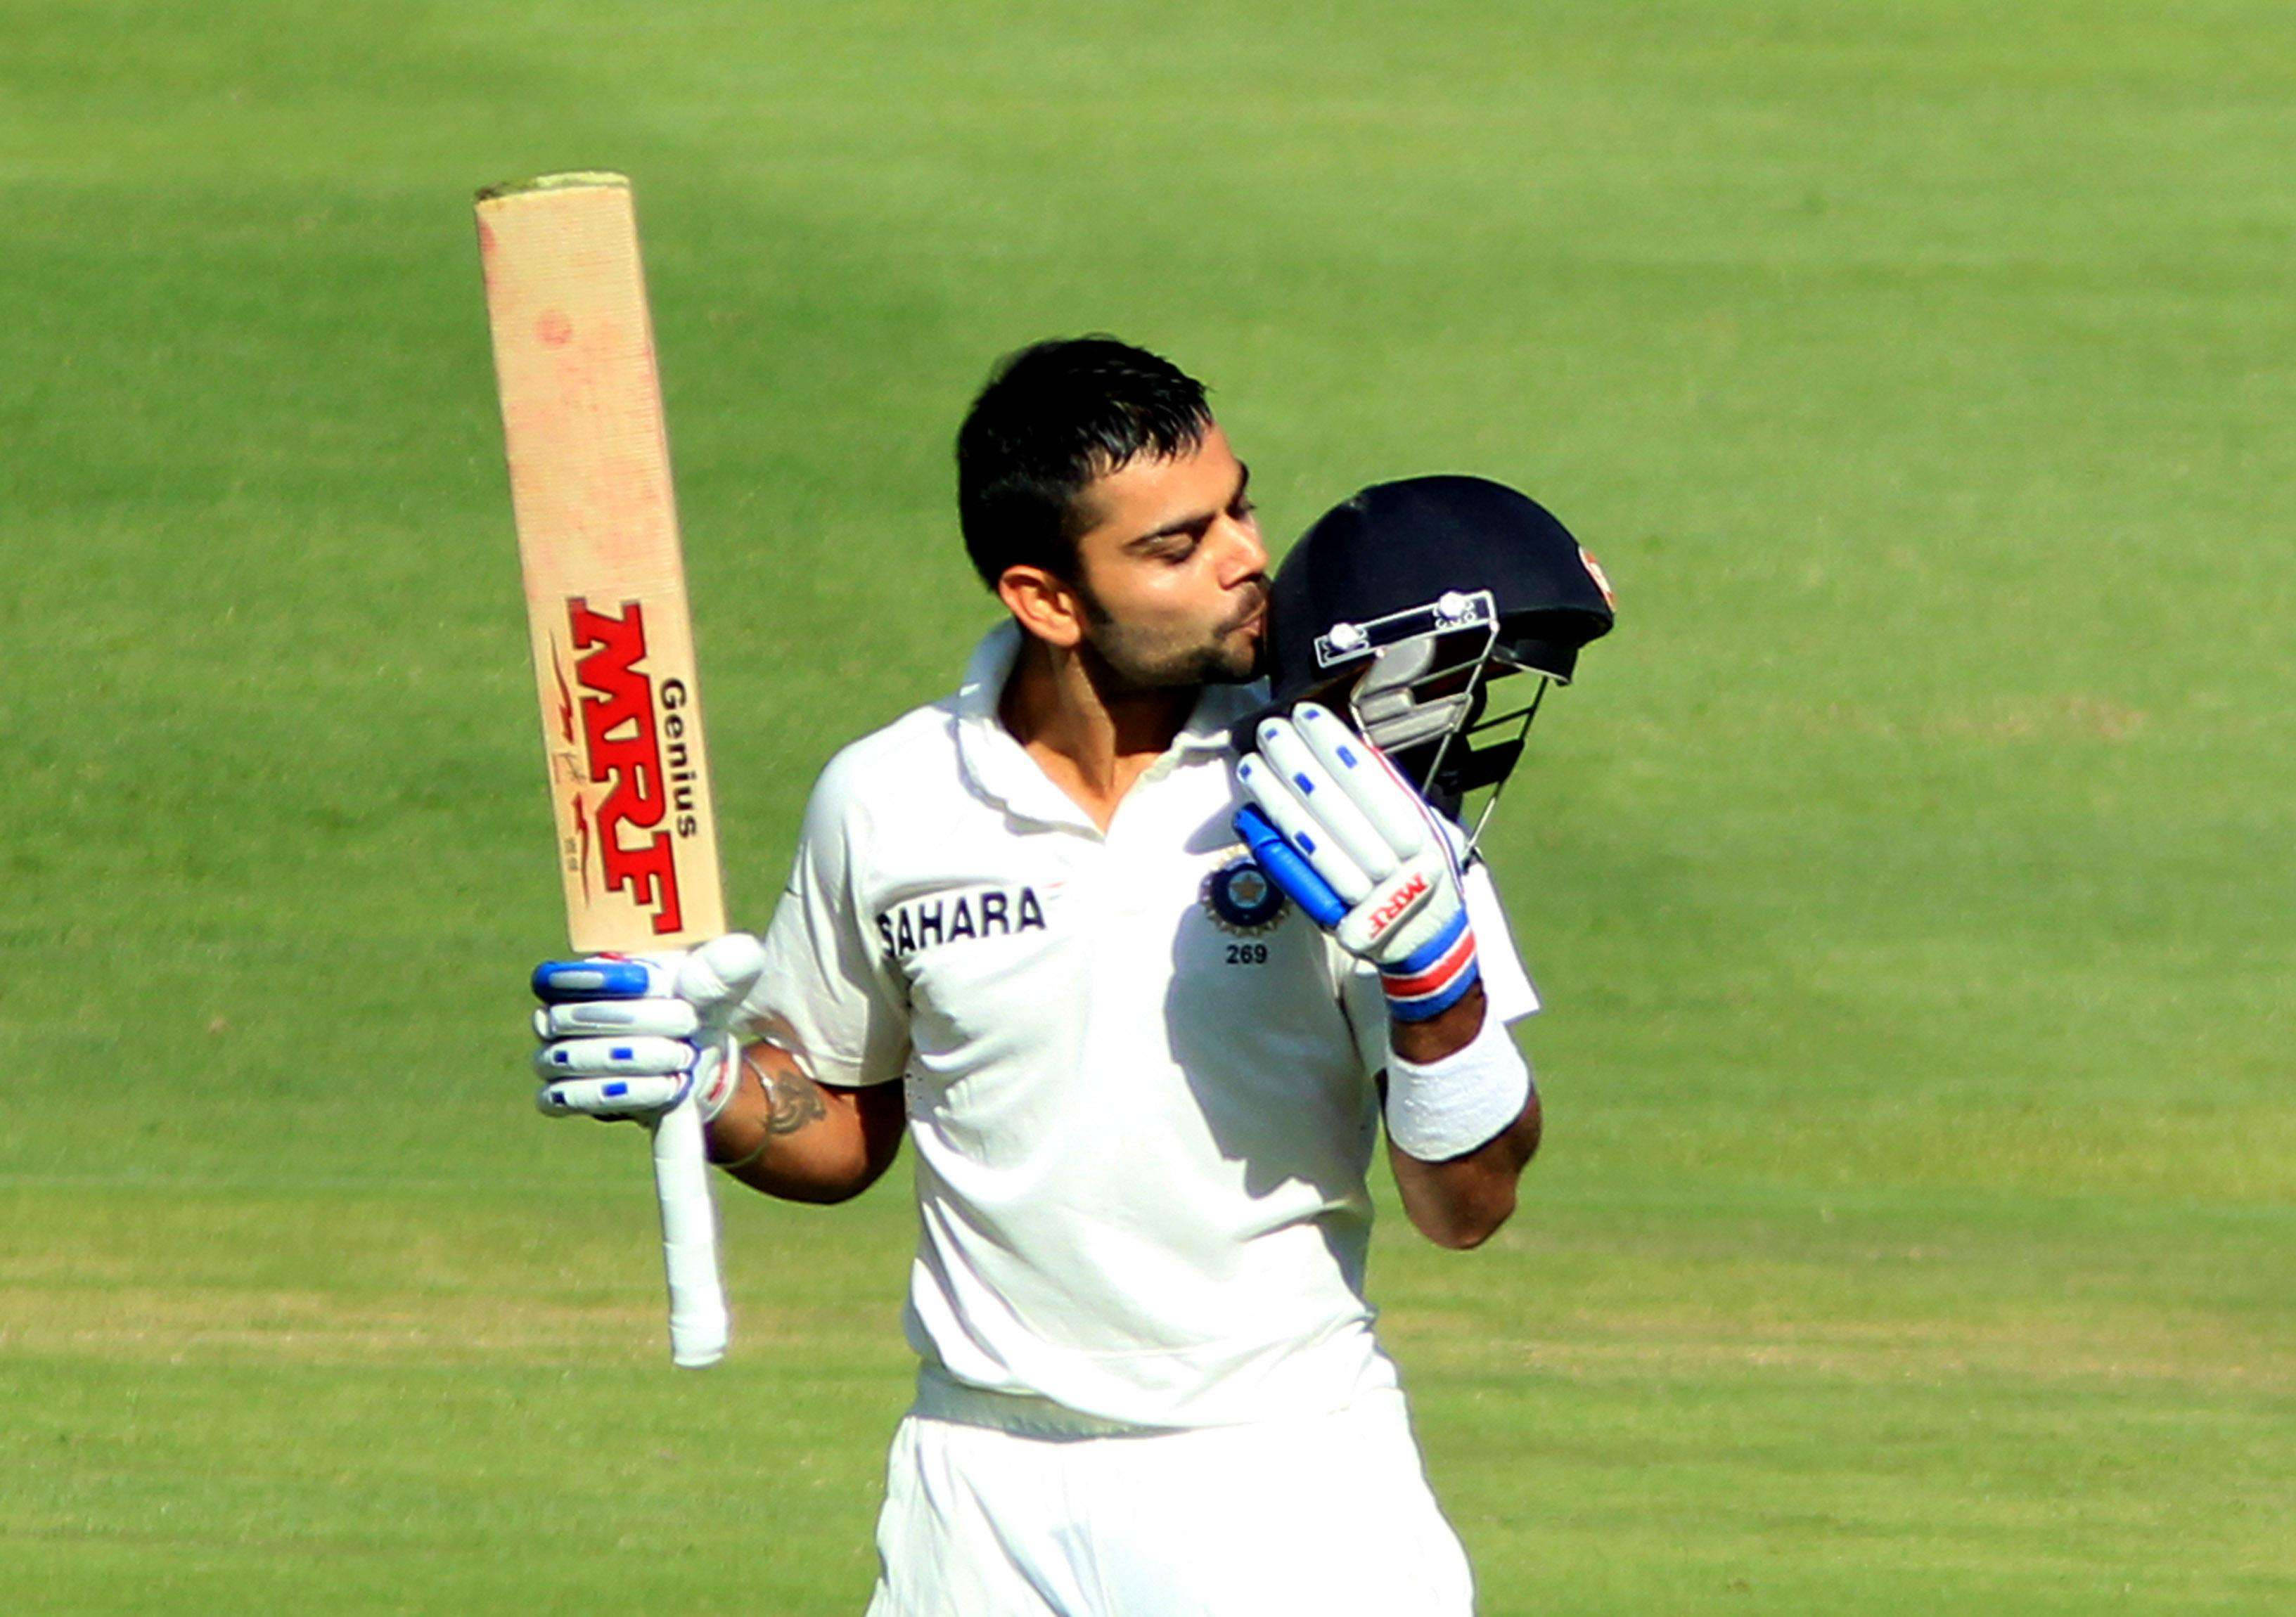 Royal Challengers Bangalore Captain Virat Kohli In Action During A Cricket Match Background